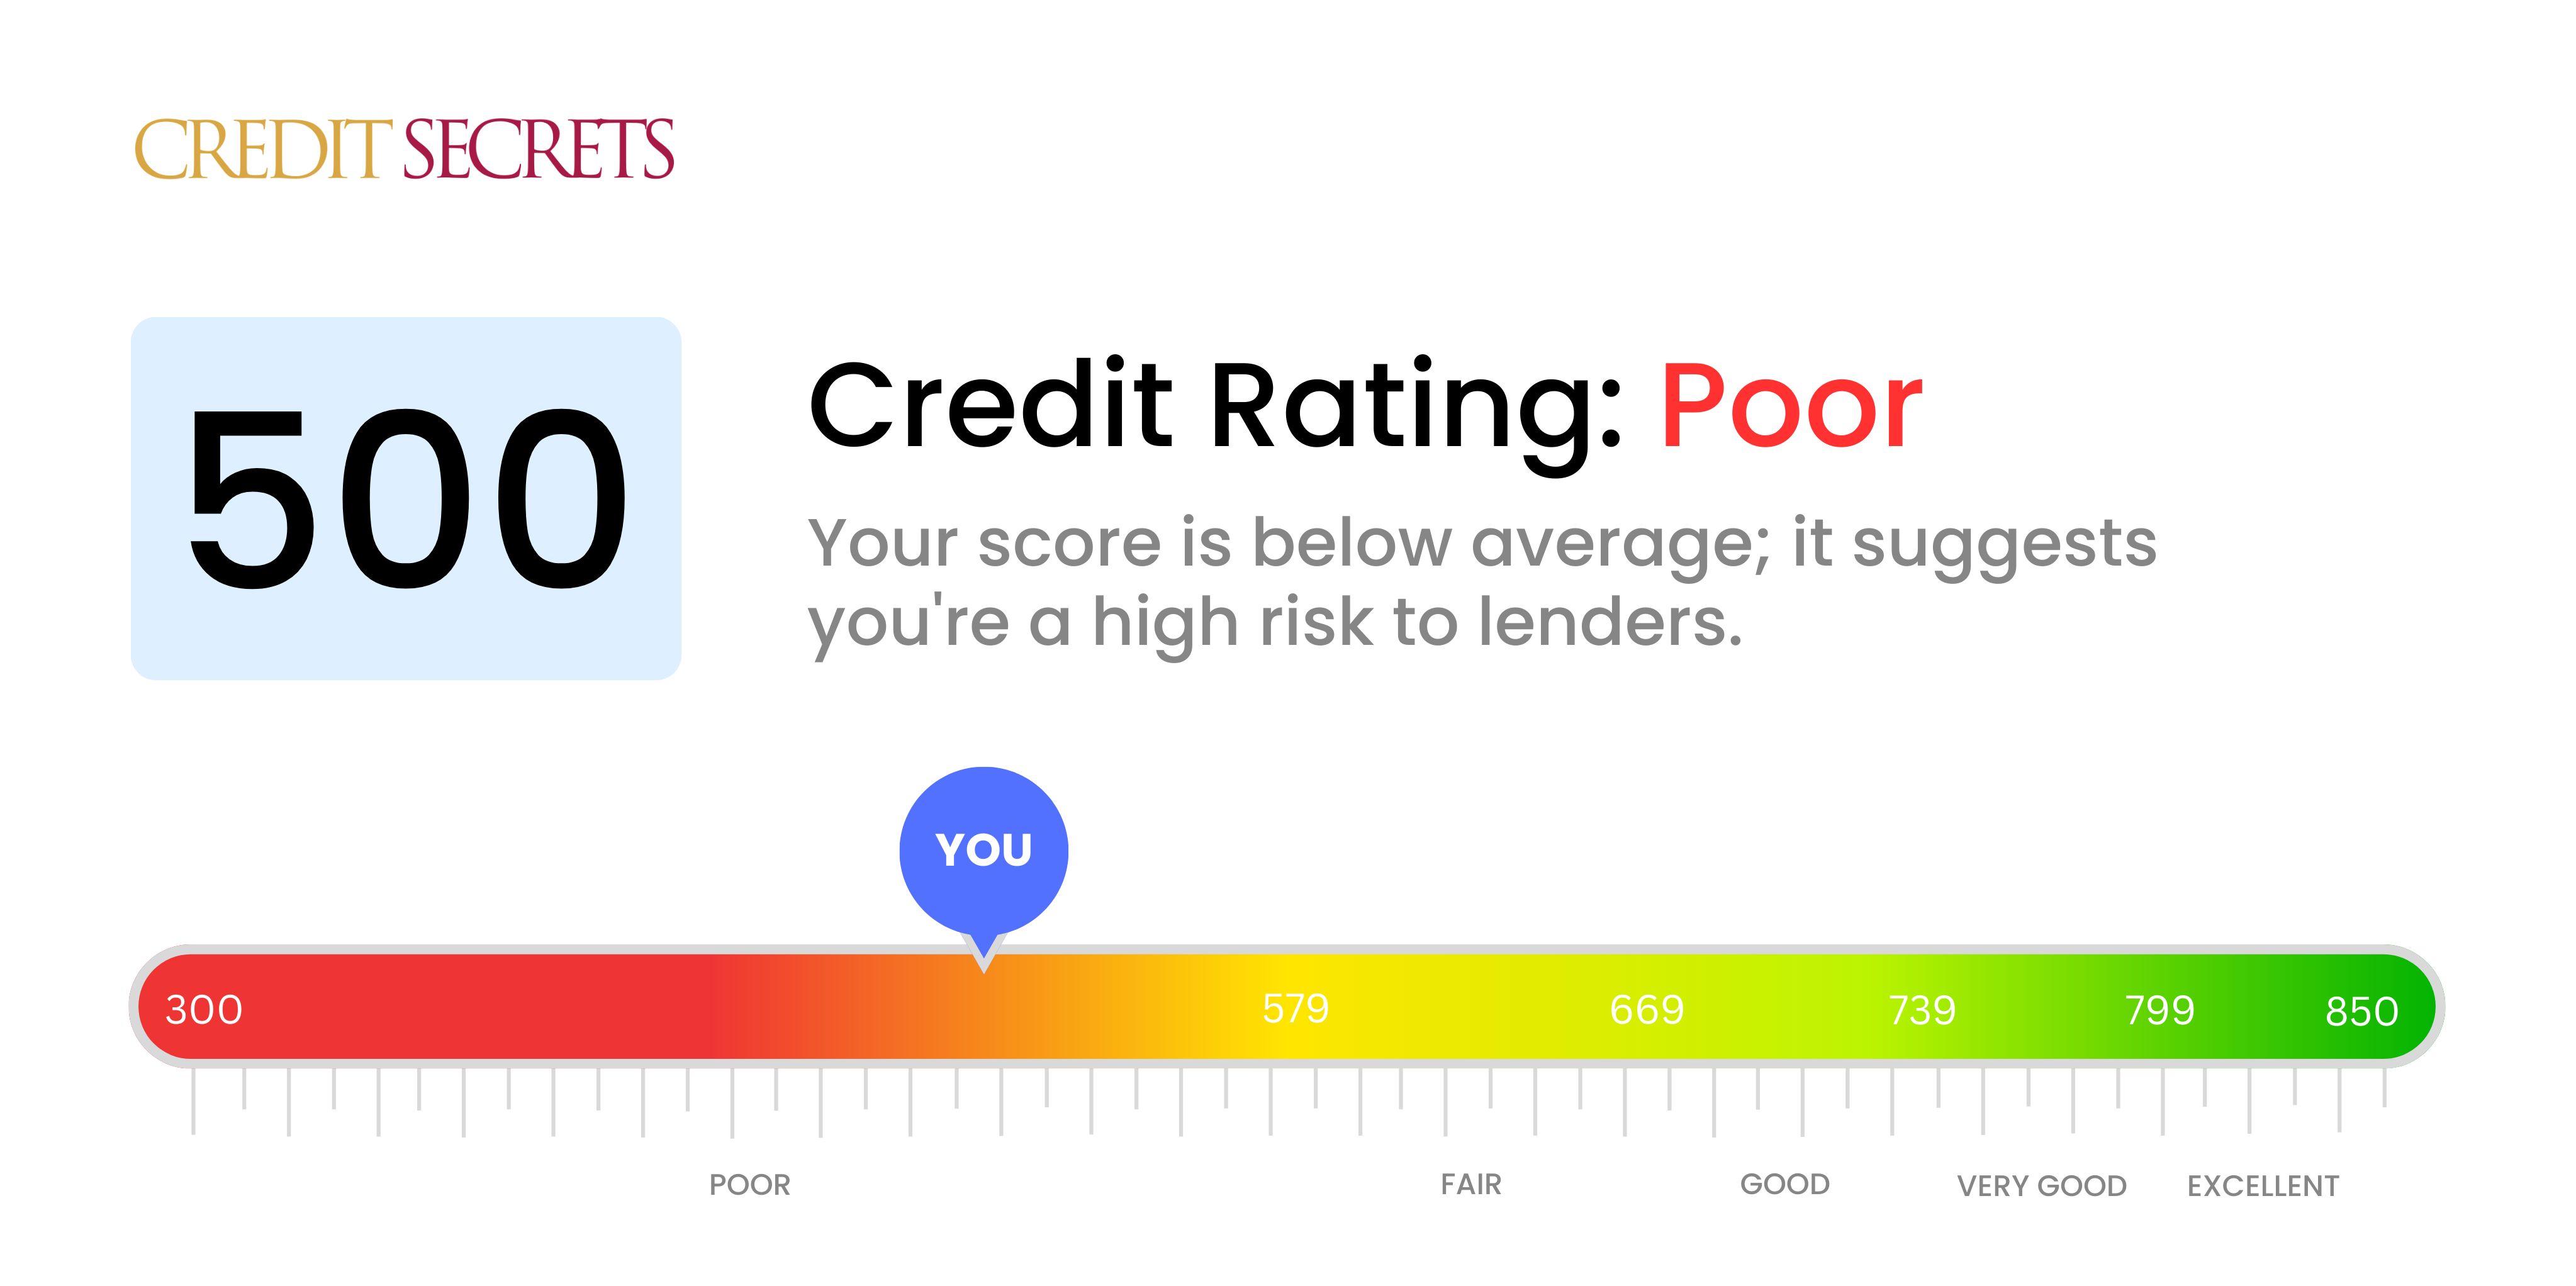 Is 500 a good credit score?